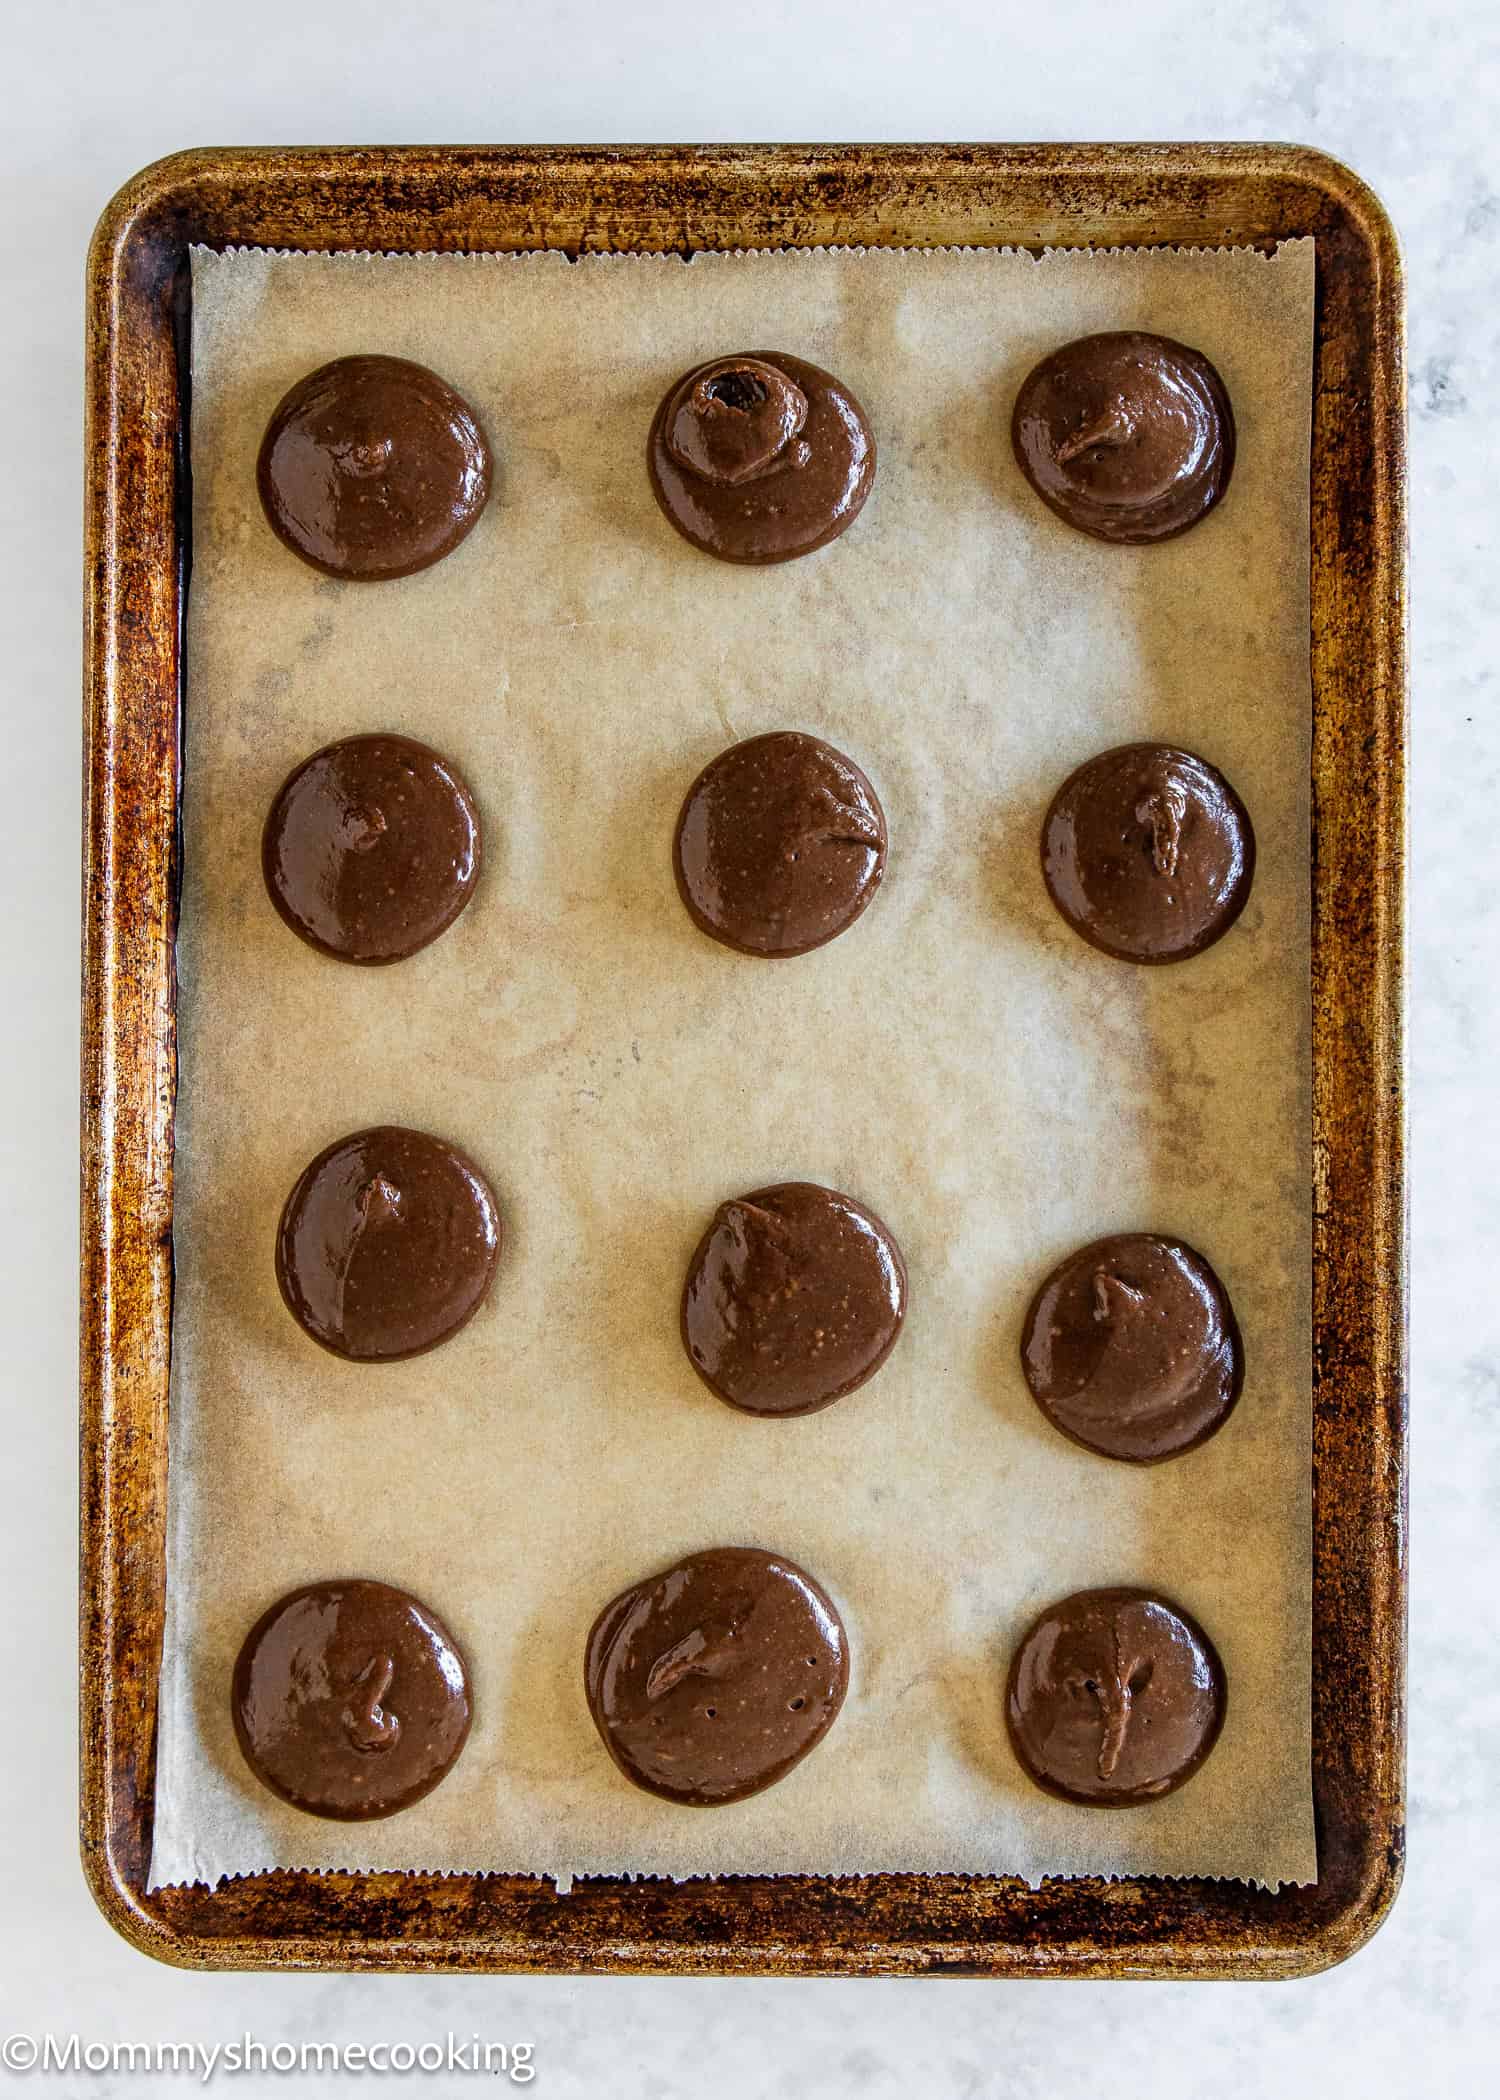 unbaked Chocolate Whoopie Pies in a baking tray.